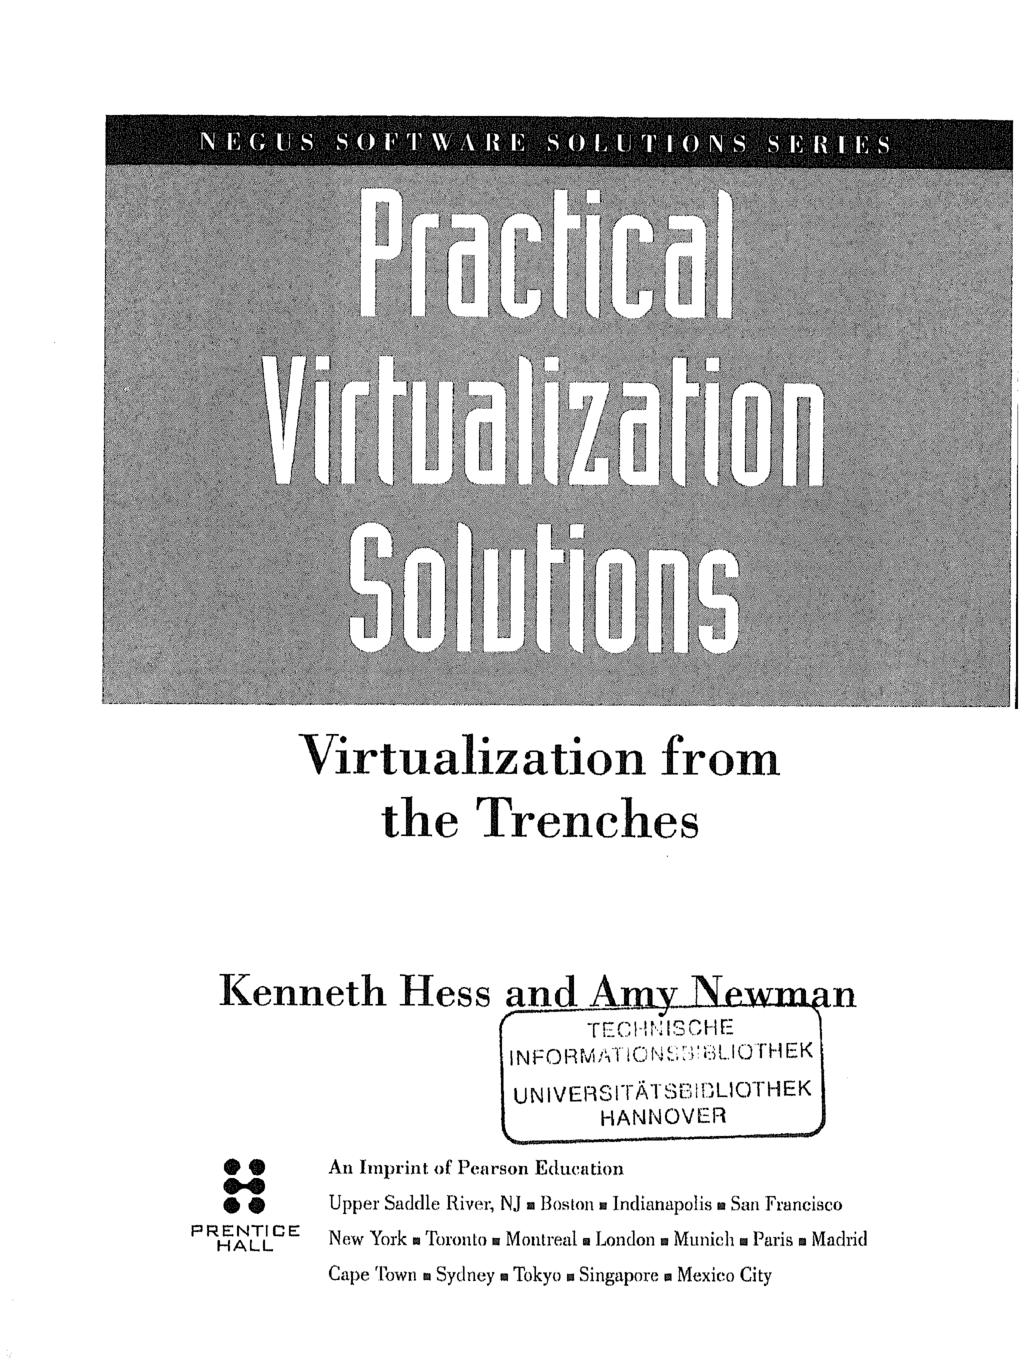 ps i: (; v s s o r t w v h \<: soli t ions s i-: k i i: s Virtualization from the Trenches Kenneth Hess and Amy Newman i -r-r-r->i mioour: TECH KIS CHE INFORM AT 8LIOTHEK UNIVERSITATSBiCLIOTHEK